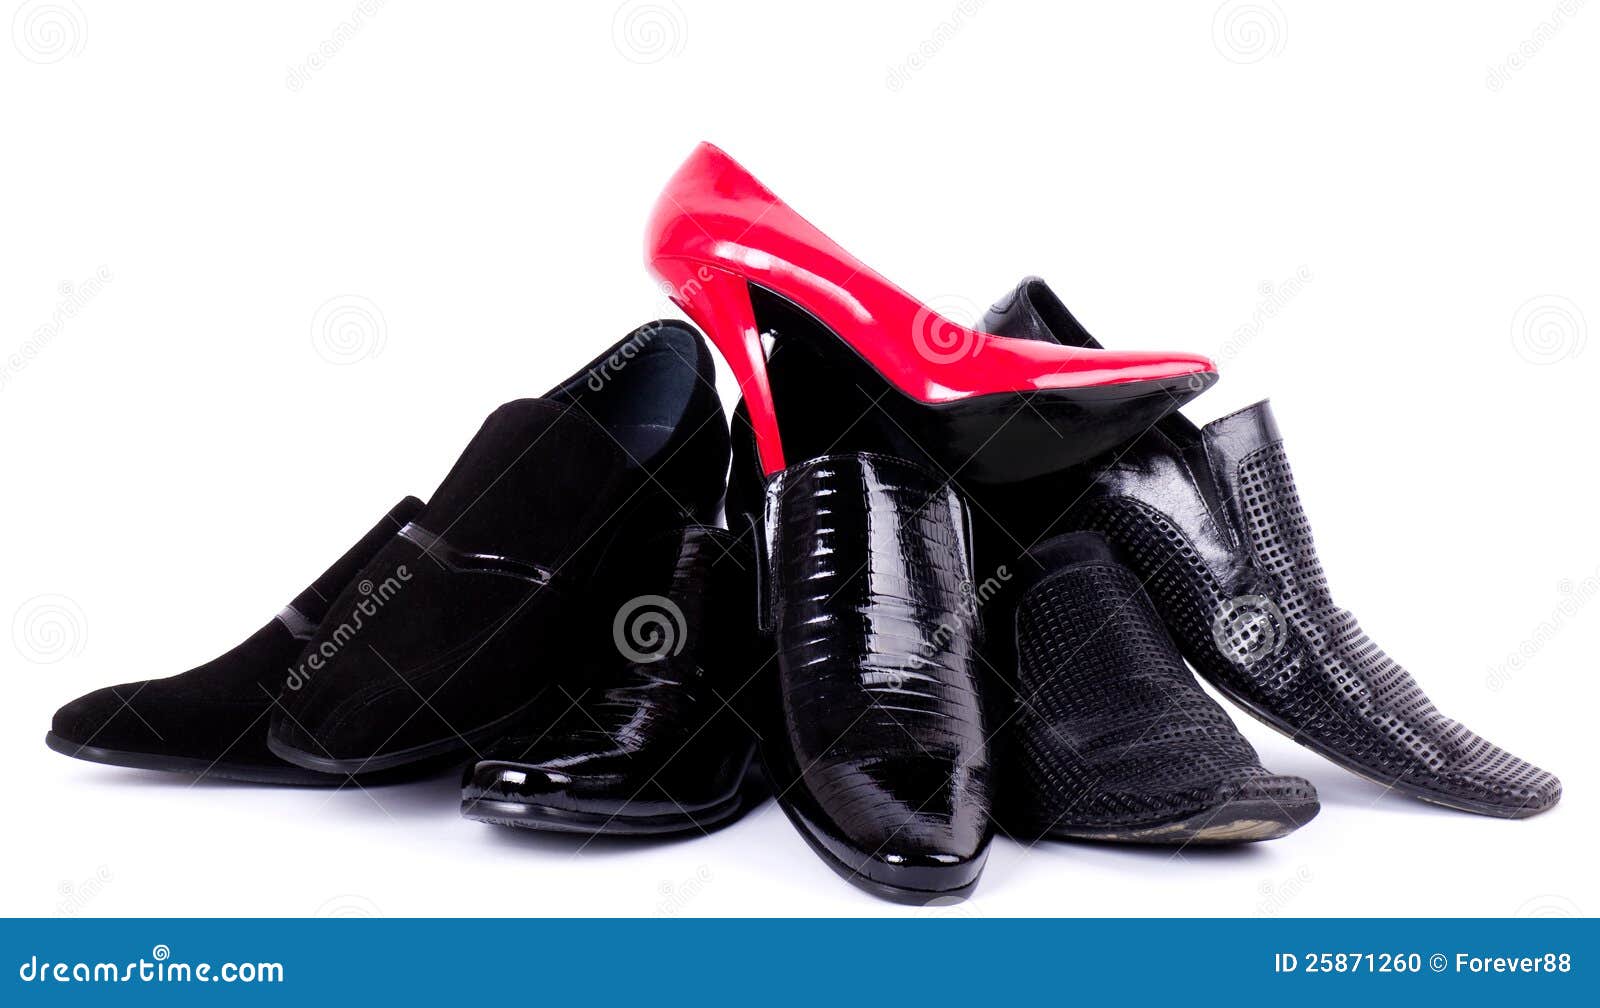 fashionable man s and womanish shoes